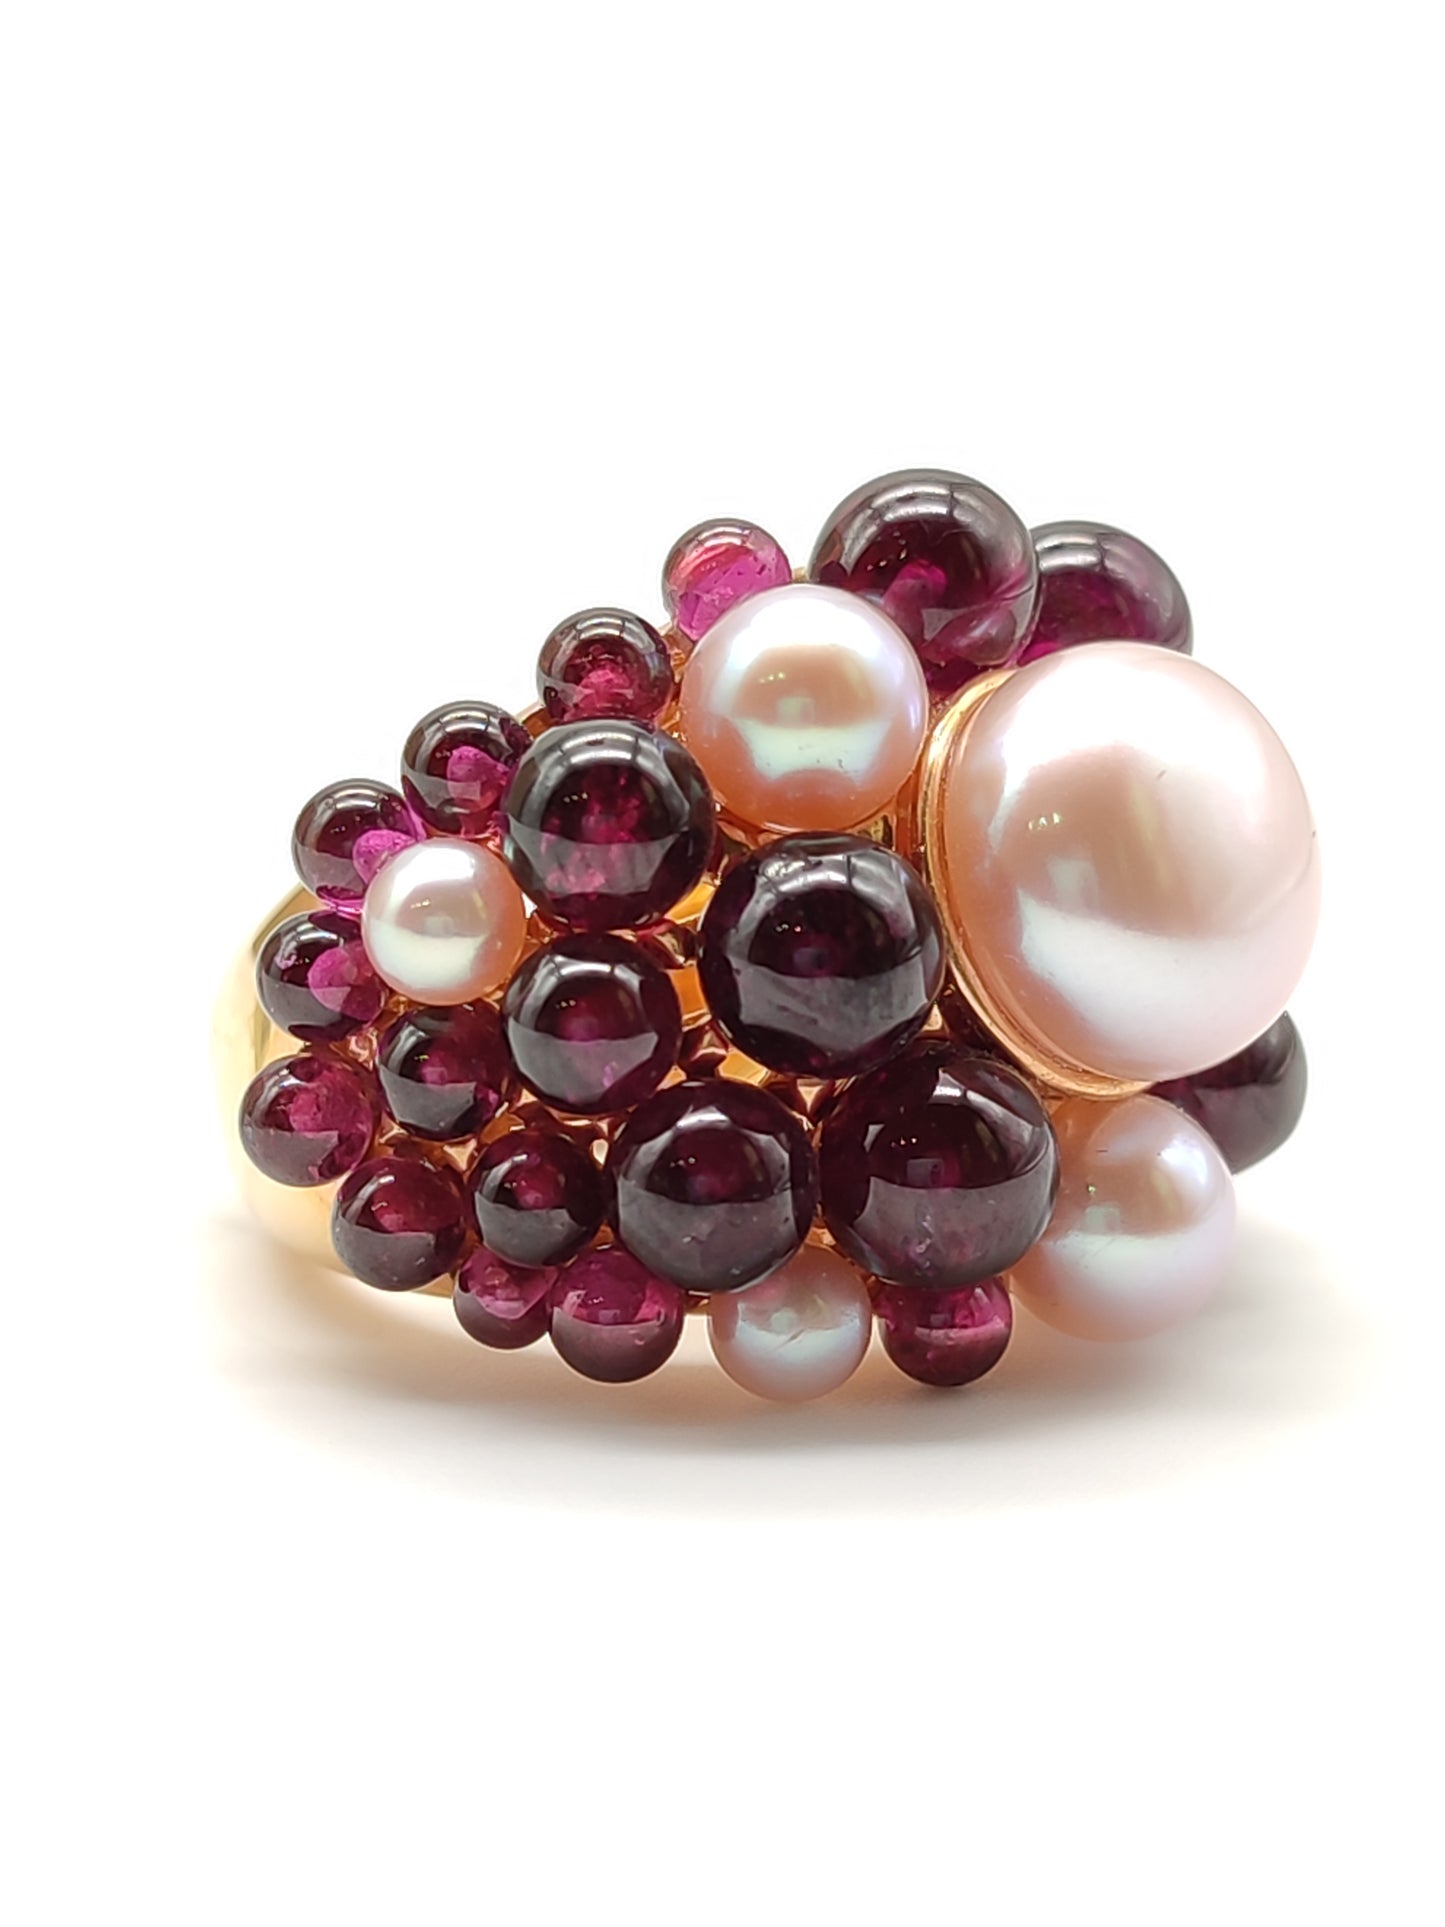 MiMì - Gold band ring with pearls and amethysts